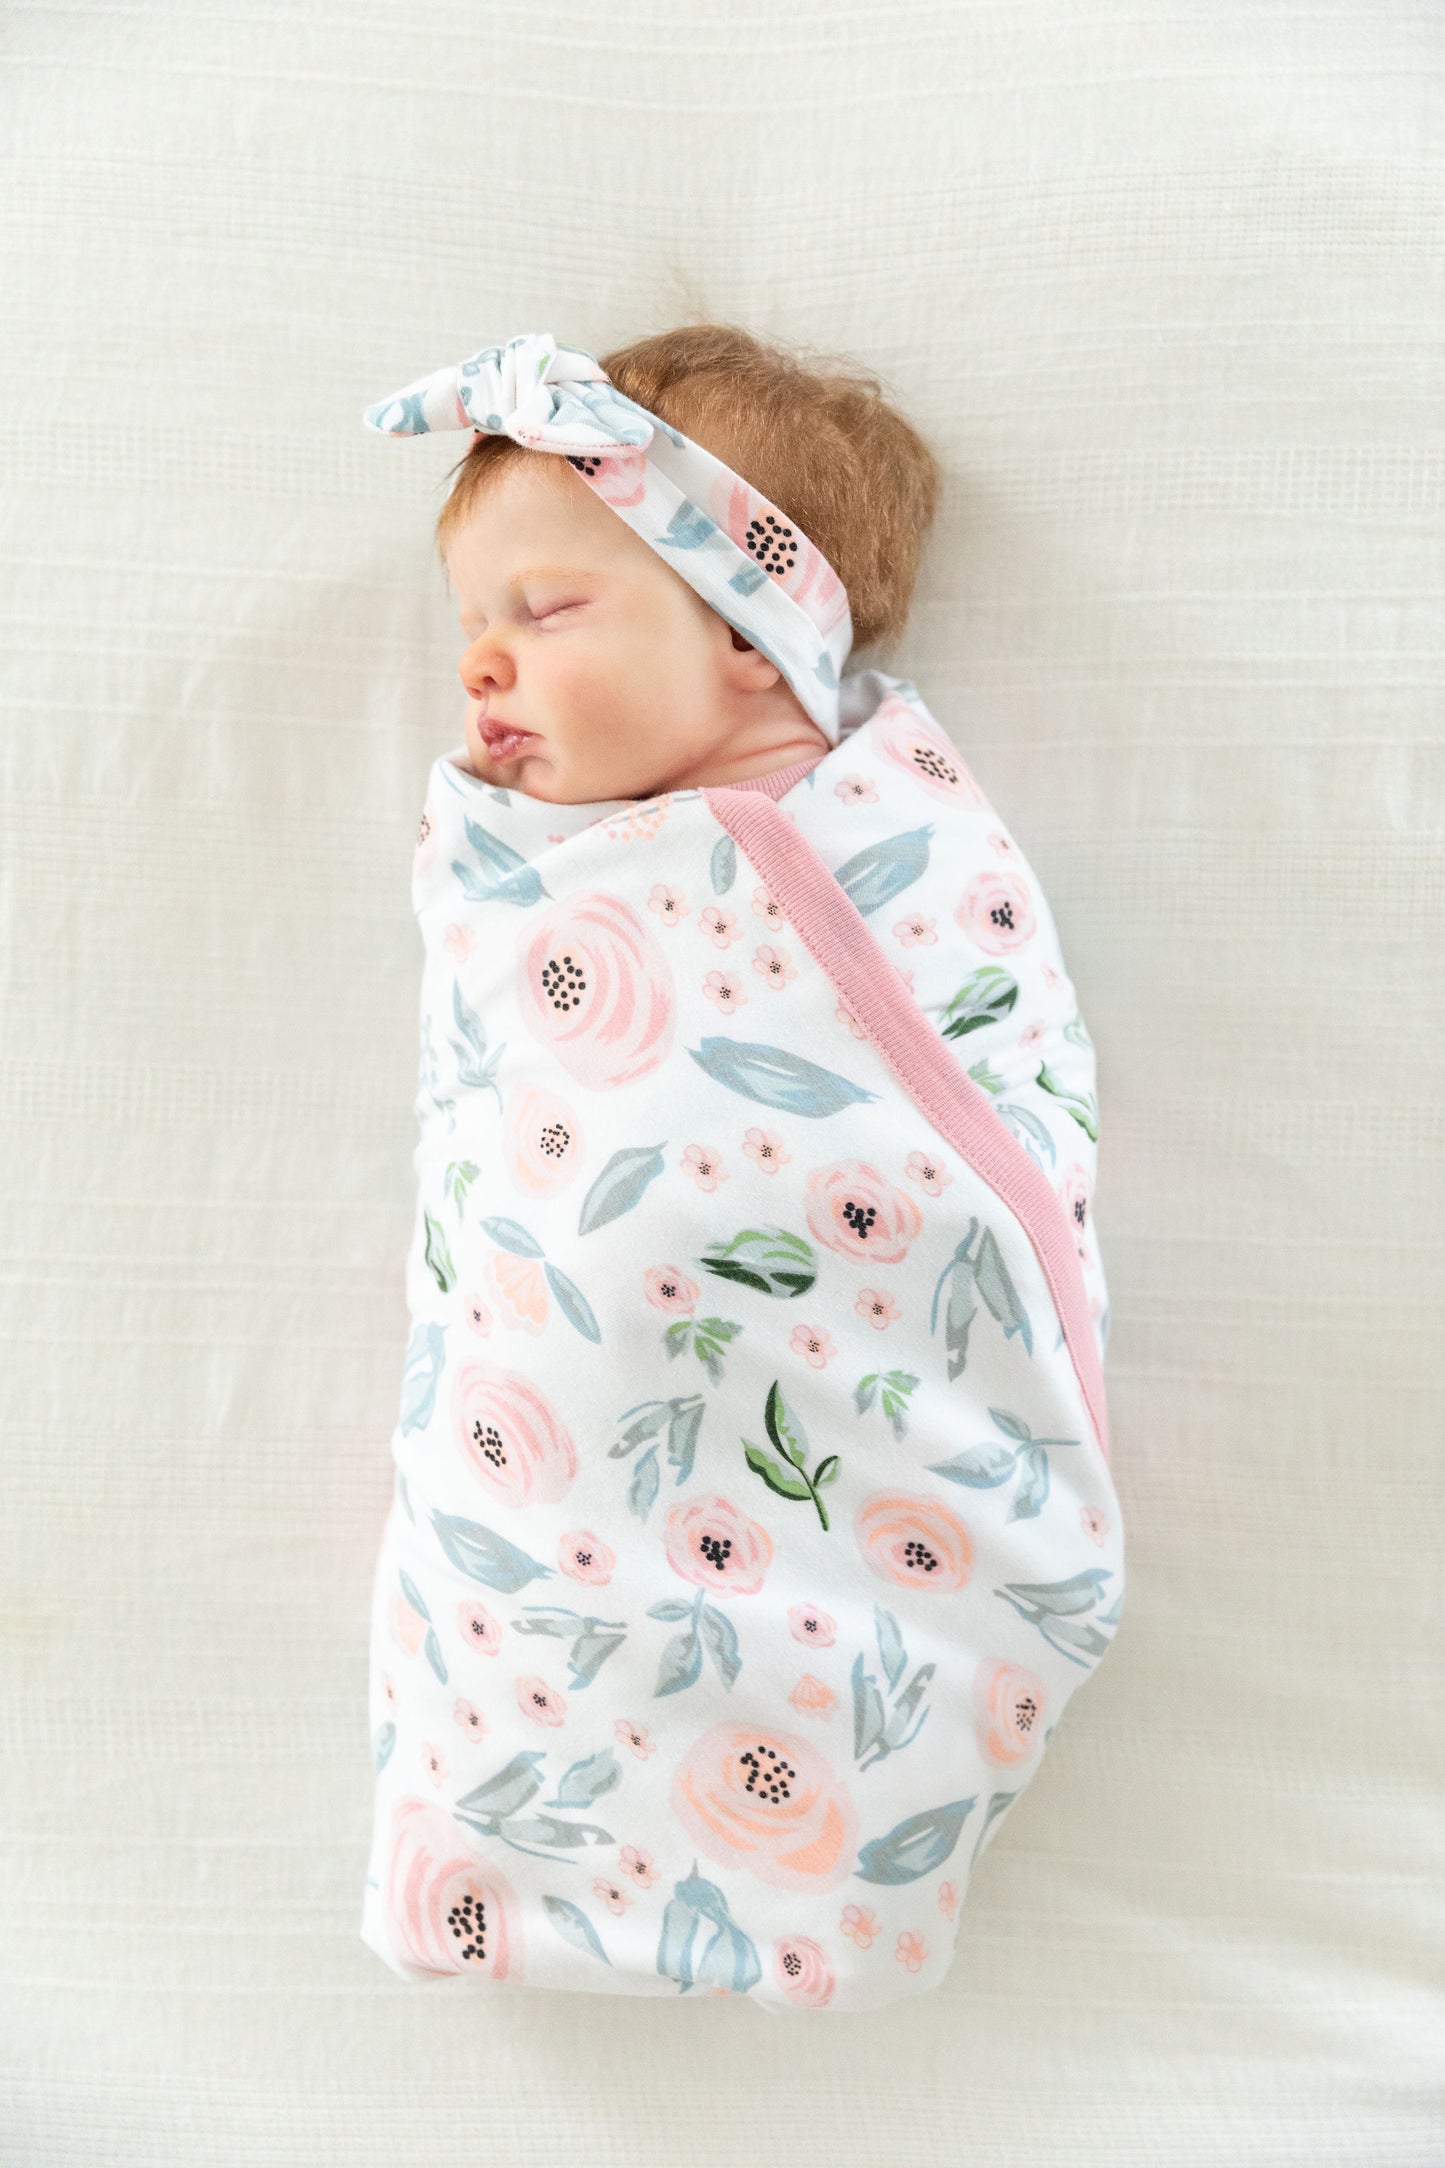 Ivy Gownie & Baby Girl Swaddle Blanket Set